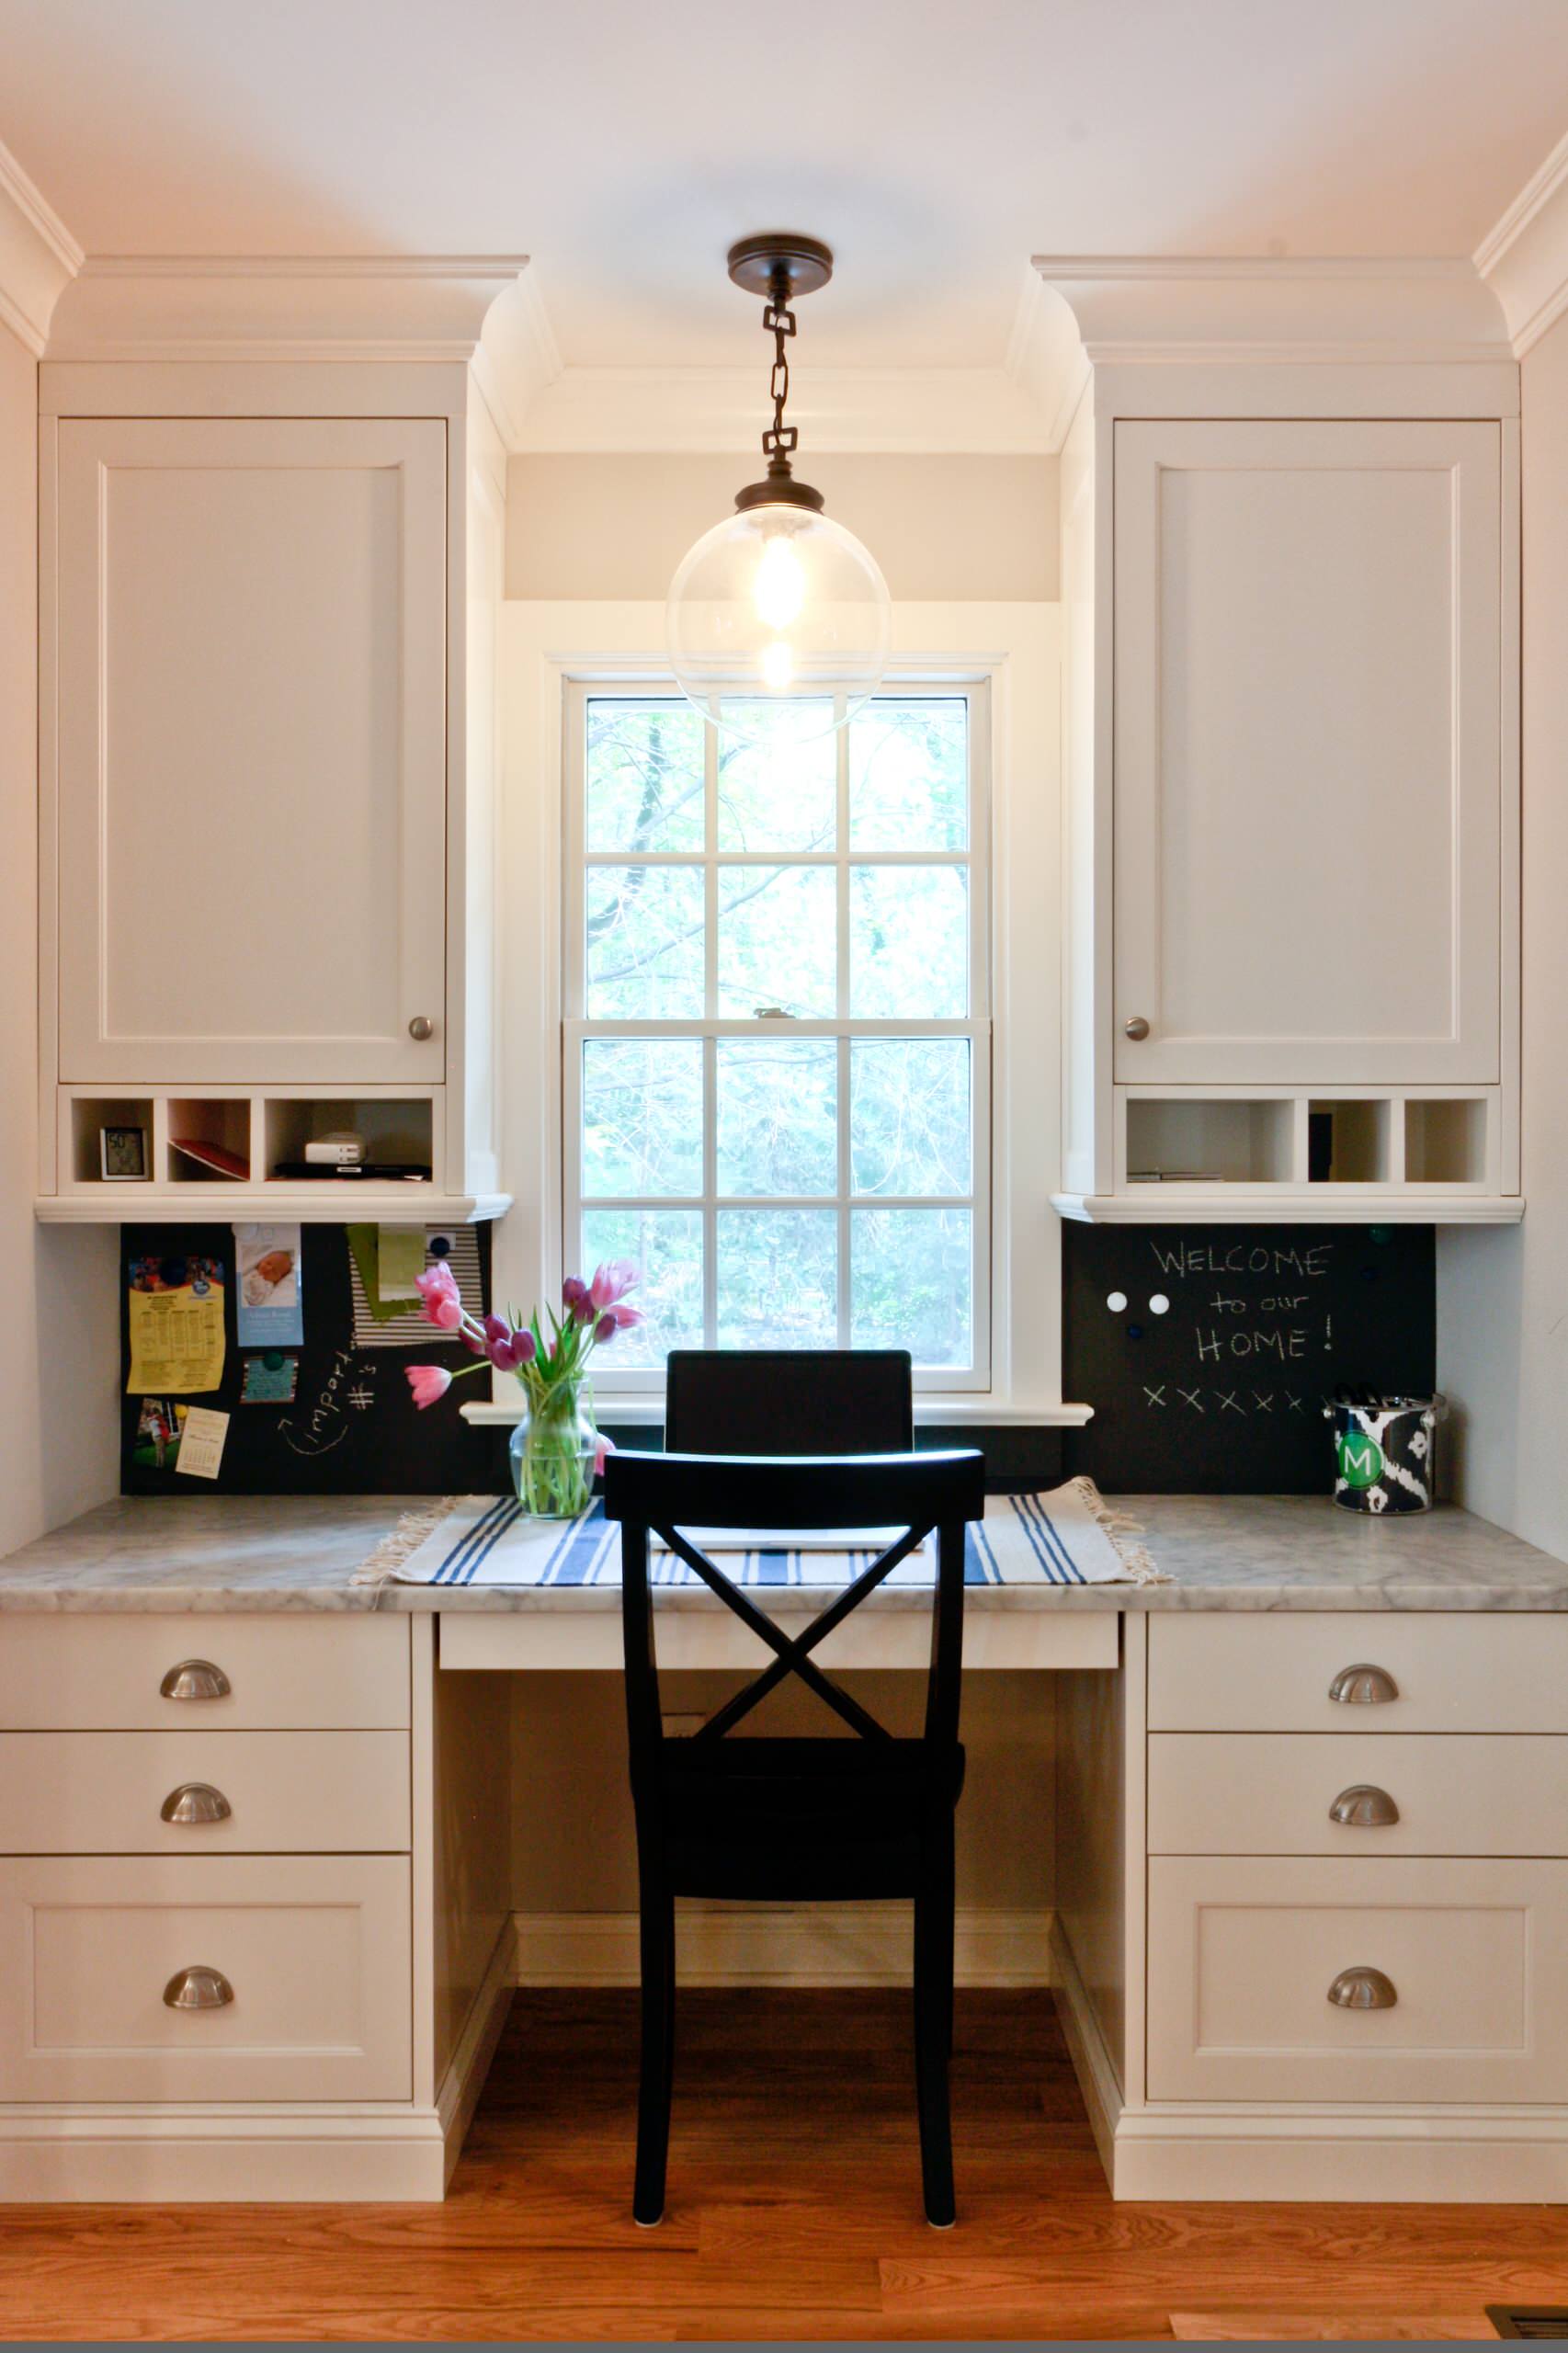 Built In File Cabinet - Photos & Ideas | Houzz